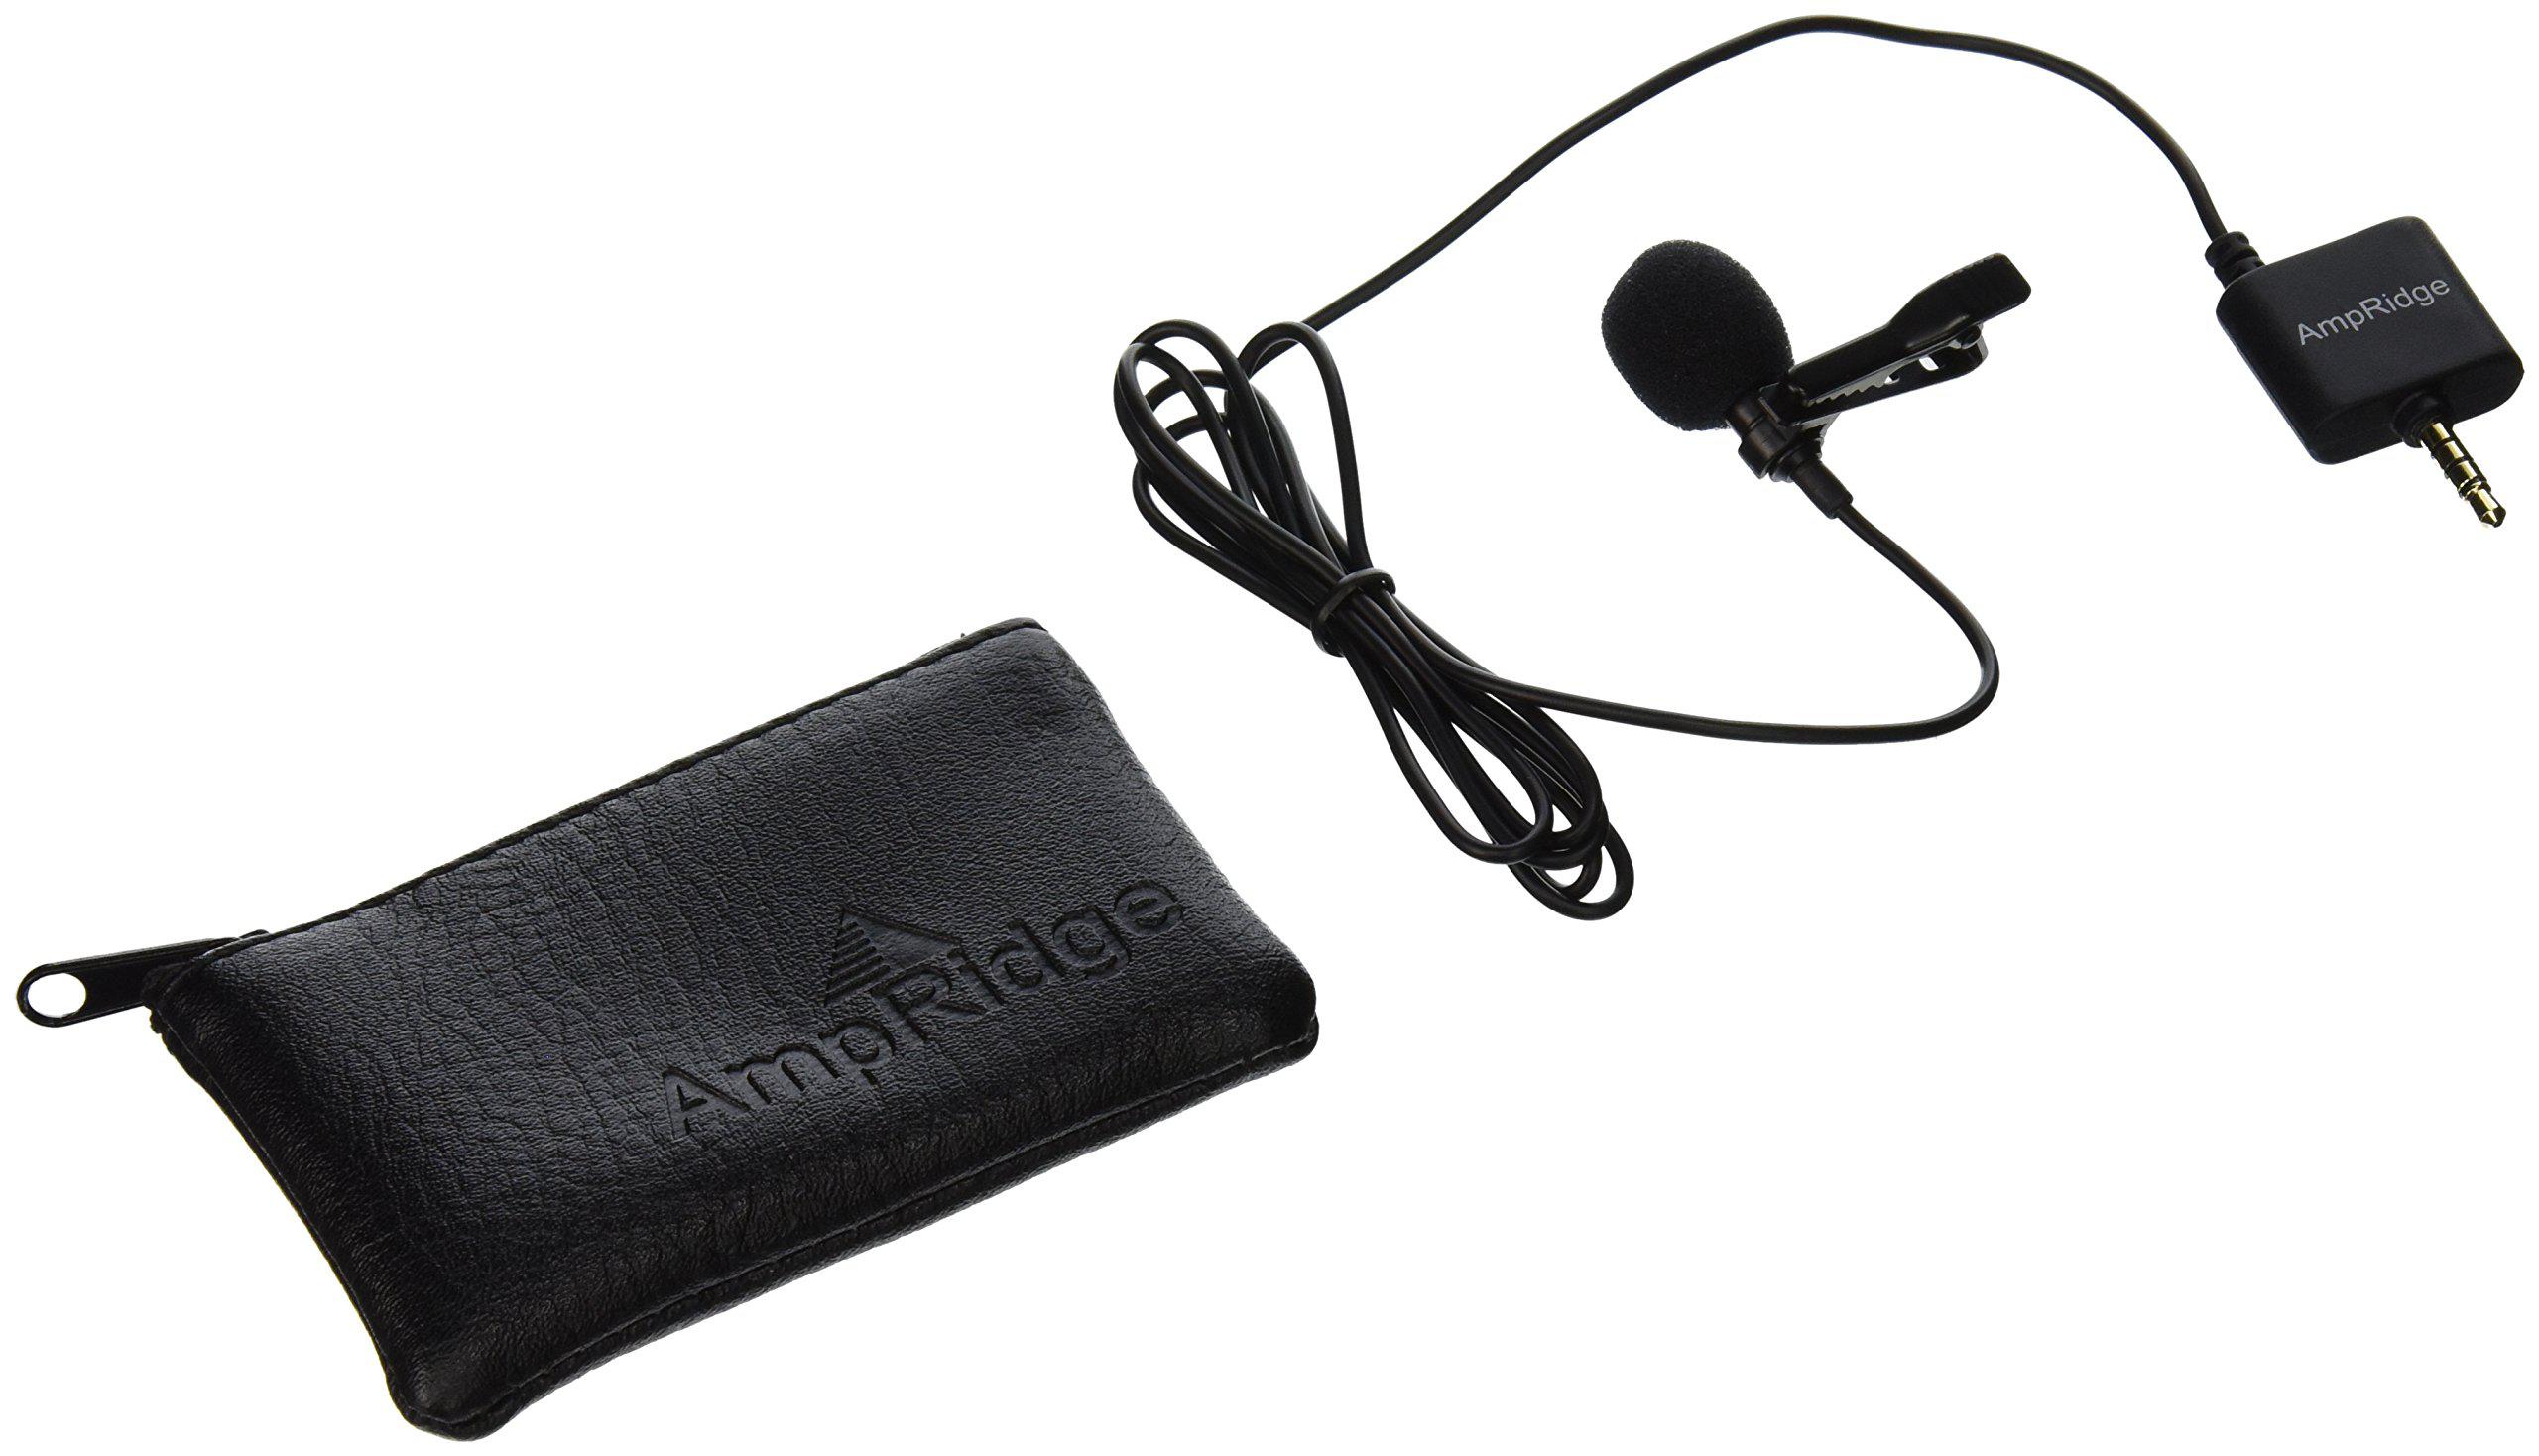 ampridge mightymic l wide-cardioid podcasting lavalier podcasting microphone for smartphone